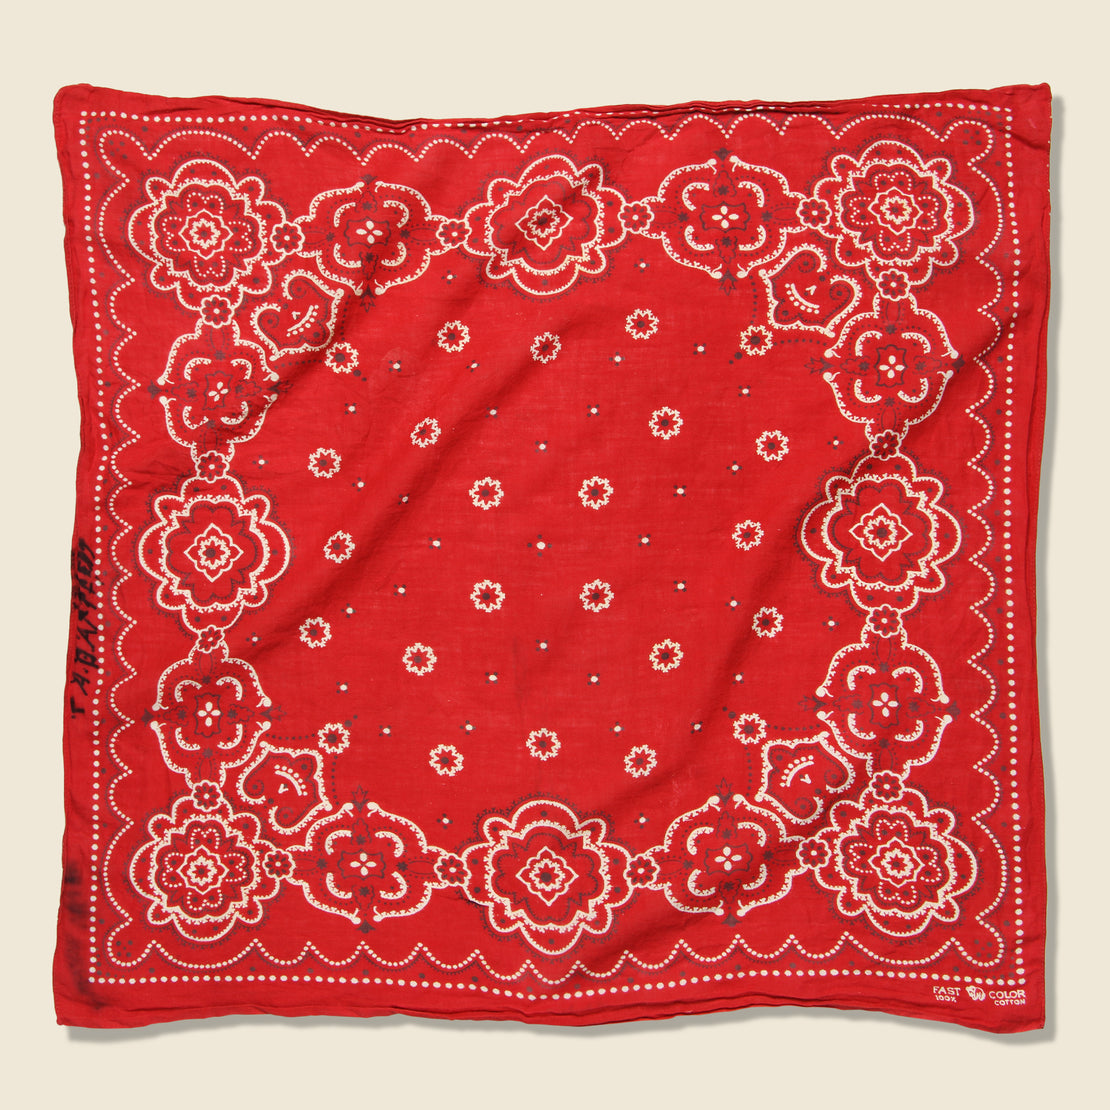 Vintage Fast Color Bandana - Red & White Paisley/Dotted Border